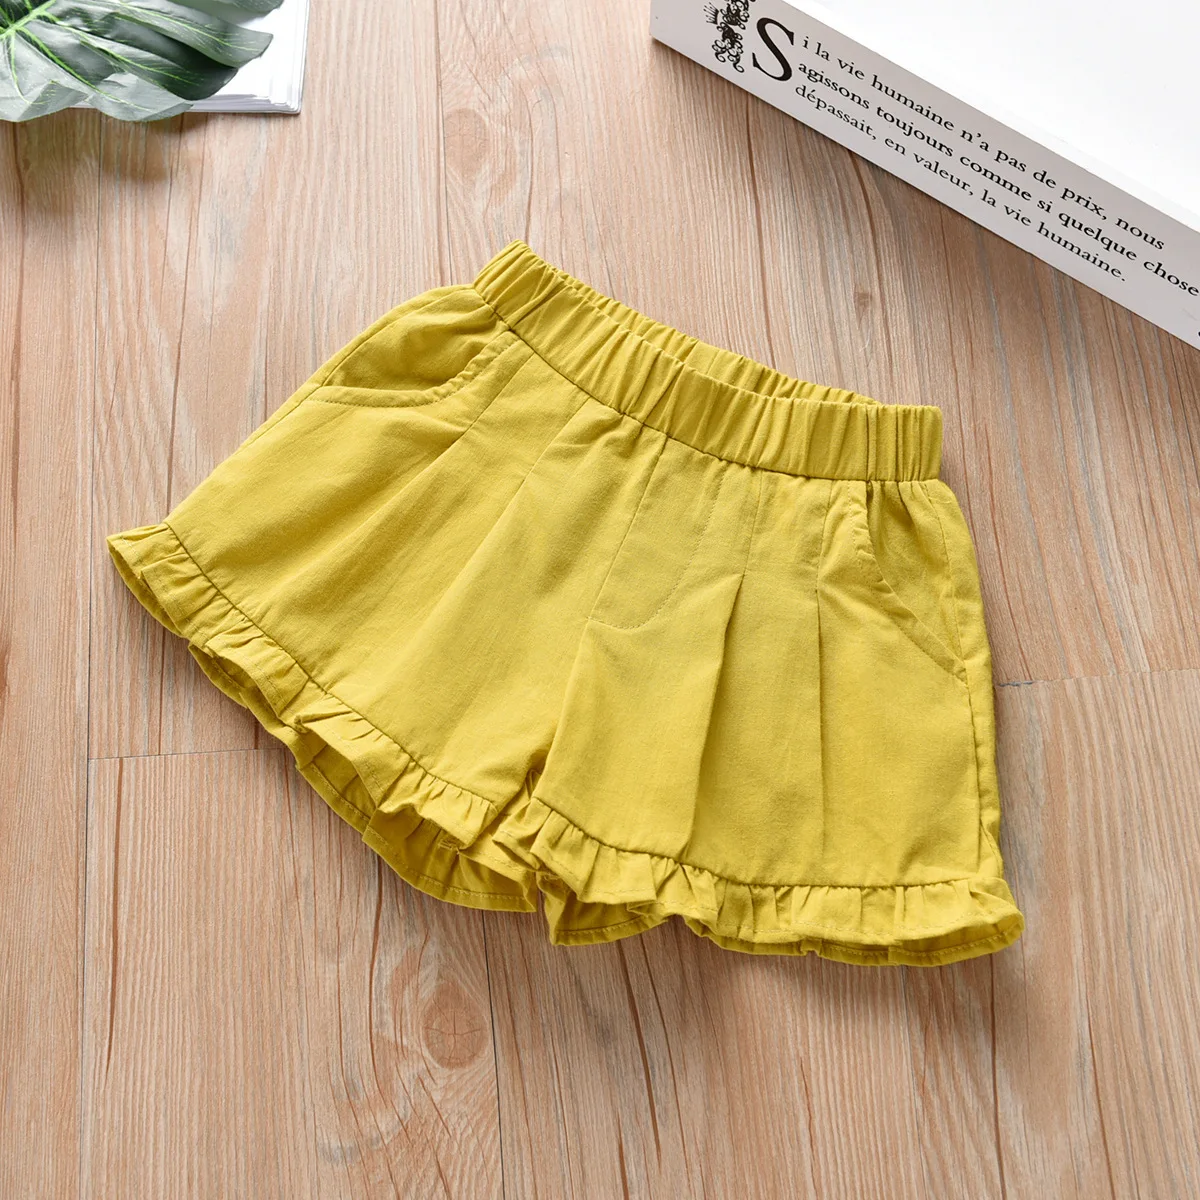 Children Kids Baby Shorts Summer Elastic Cotton Trousers Fashion Baby Five Pants Beach Shorts For Girls Boys - Color: Yellow